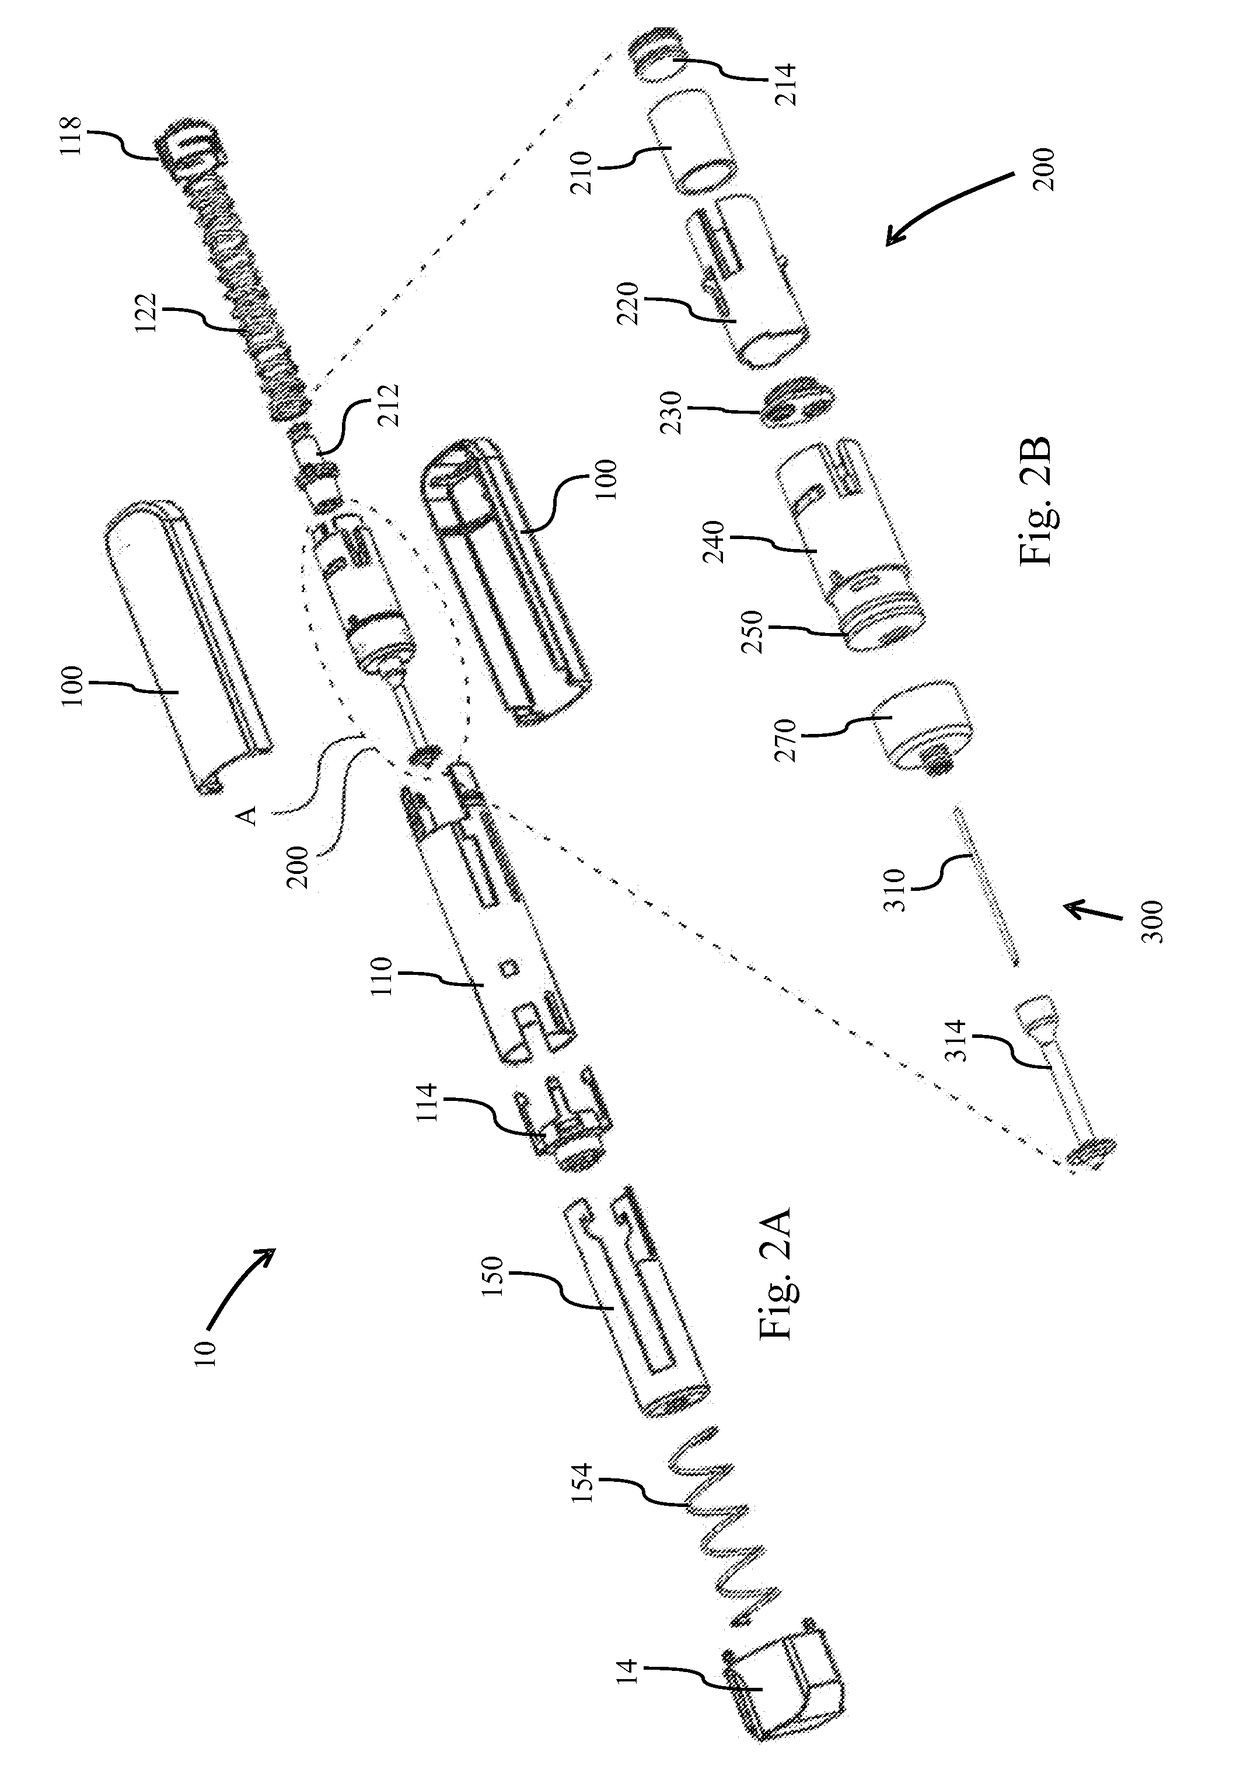 Portable Drug Mixing and Delivery Device and Associated Methods